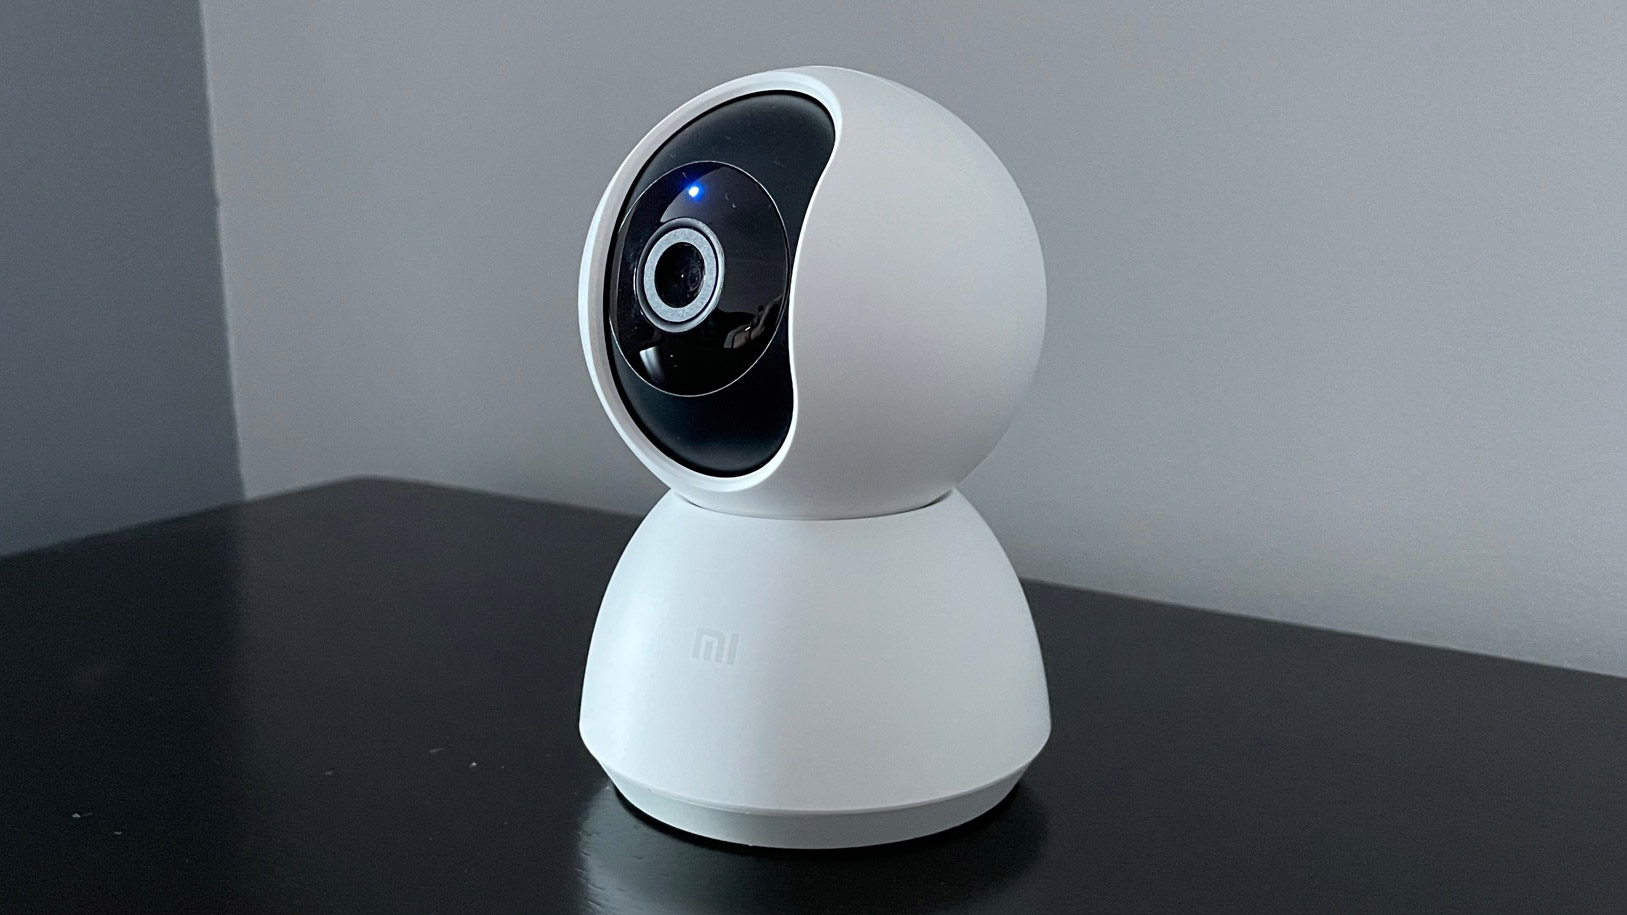 The side view of the Xiaomi Mi Home Security Camera 360